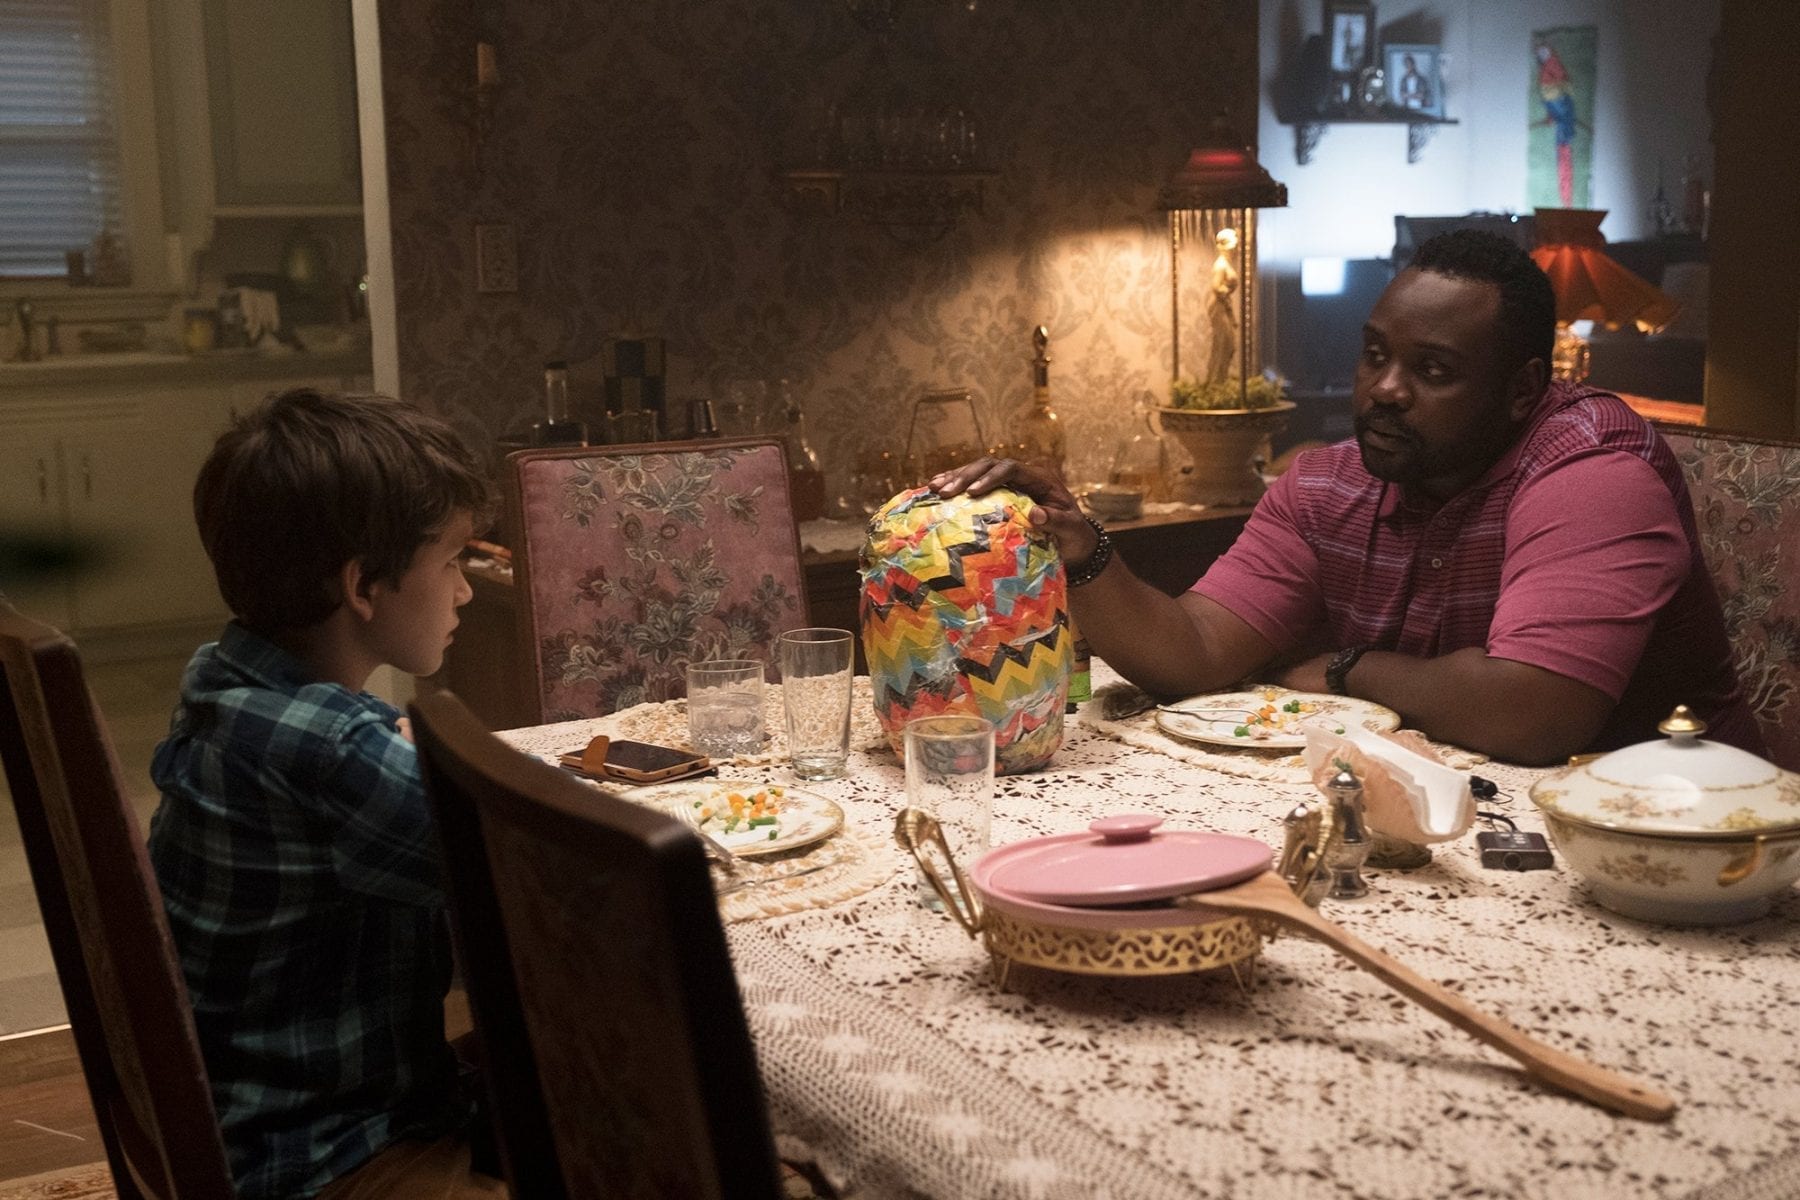 Detective Mke Norris (Brian Tyree-Henry) and Andy (Gabriel Bateman) talk over dinner, a strange "gift" in between them.